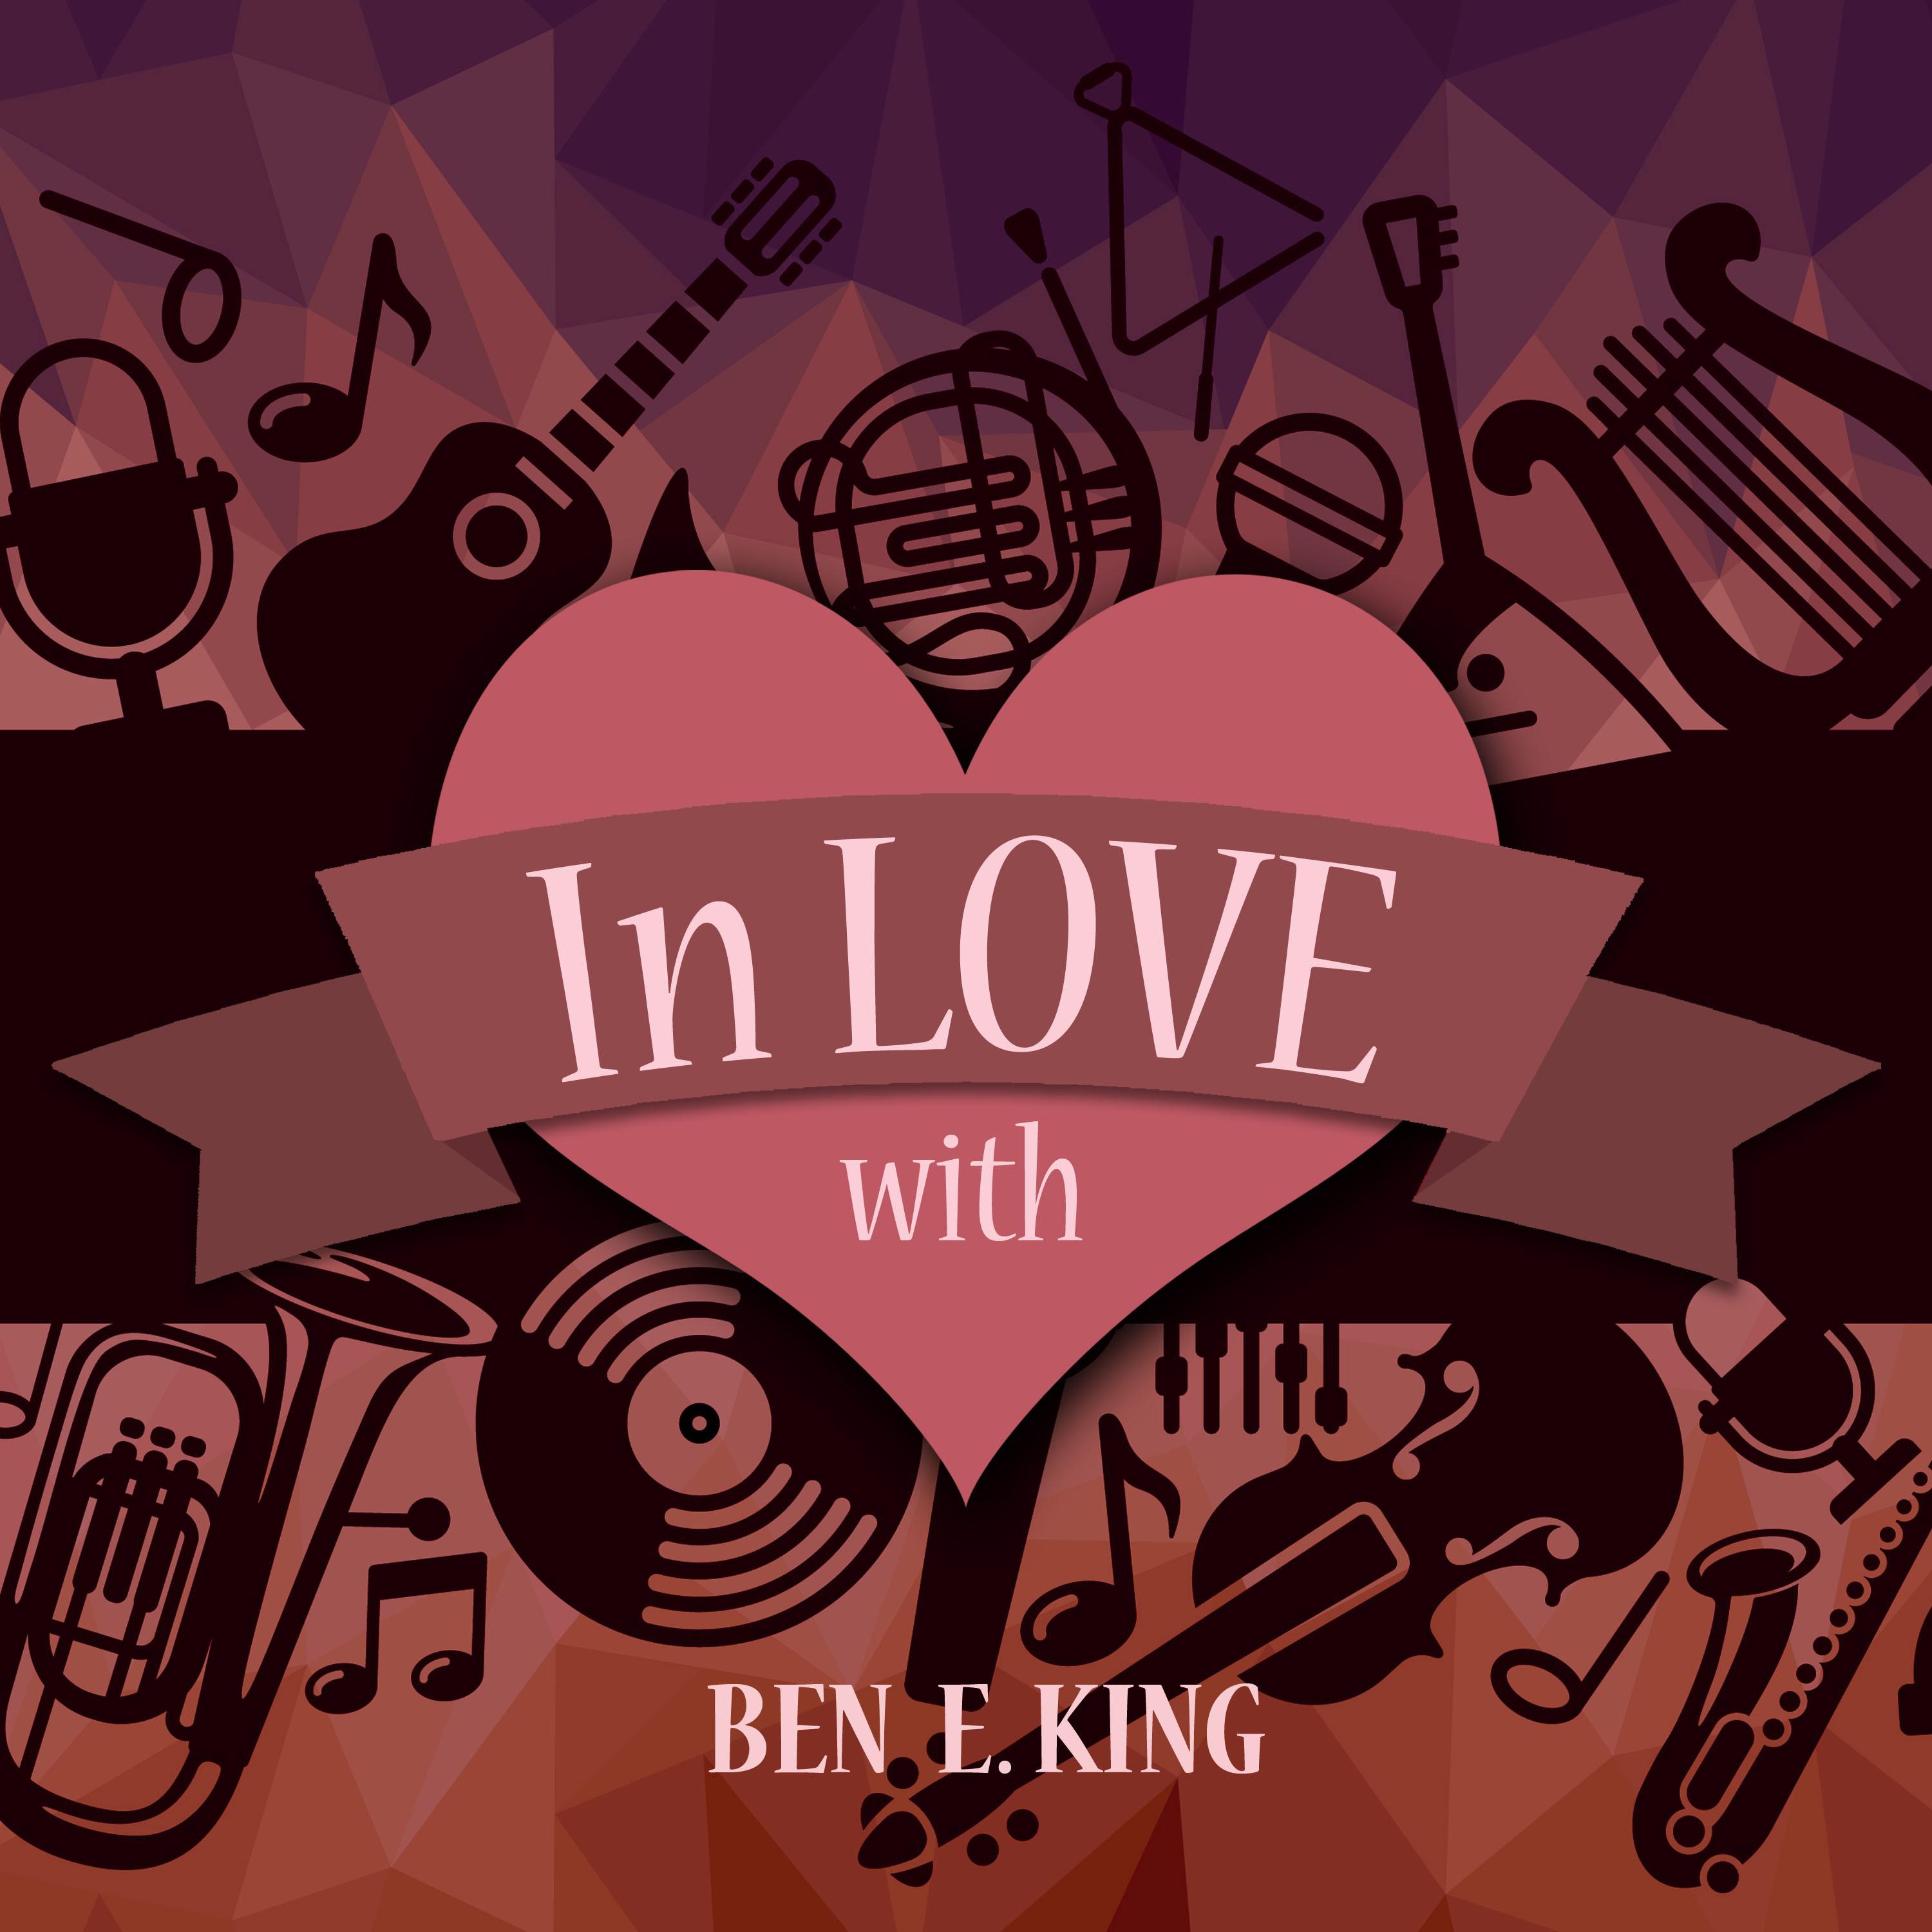 In Love with Ben E. King